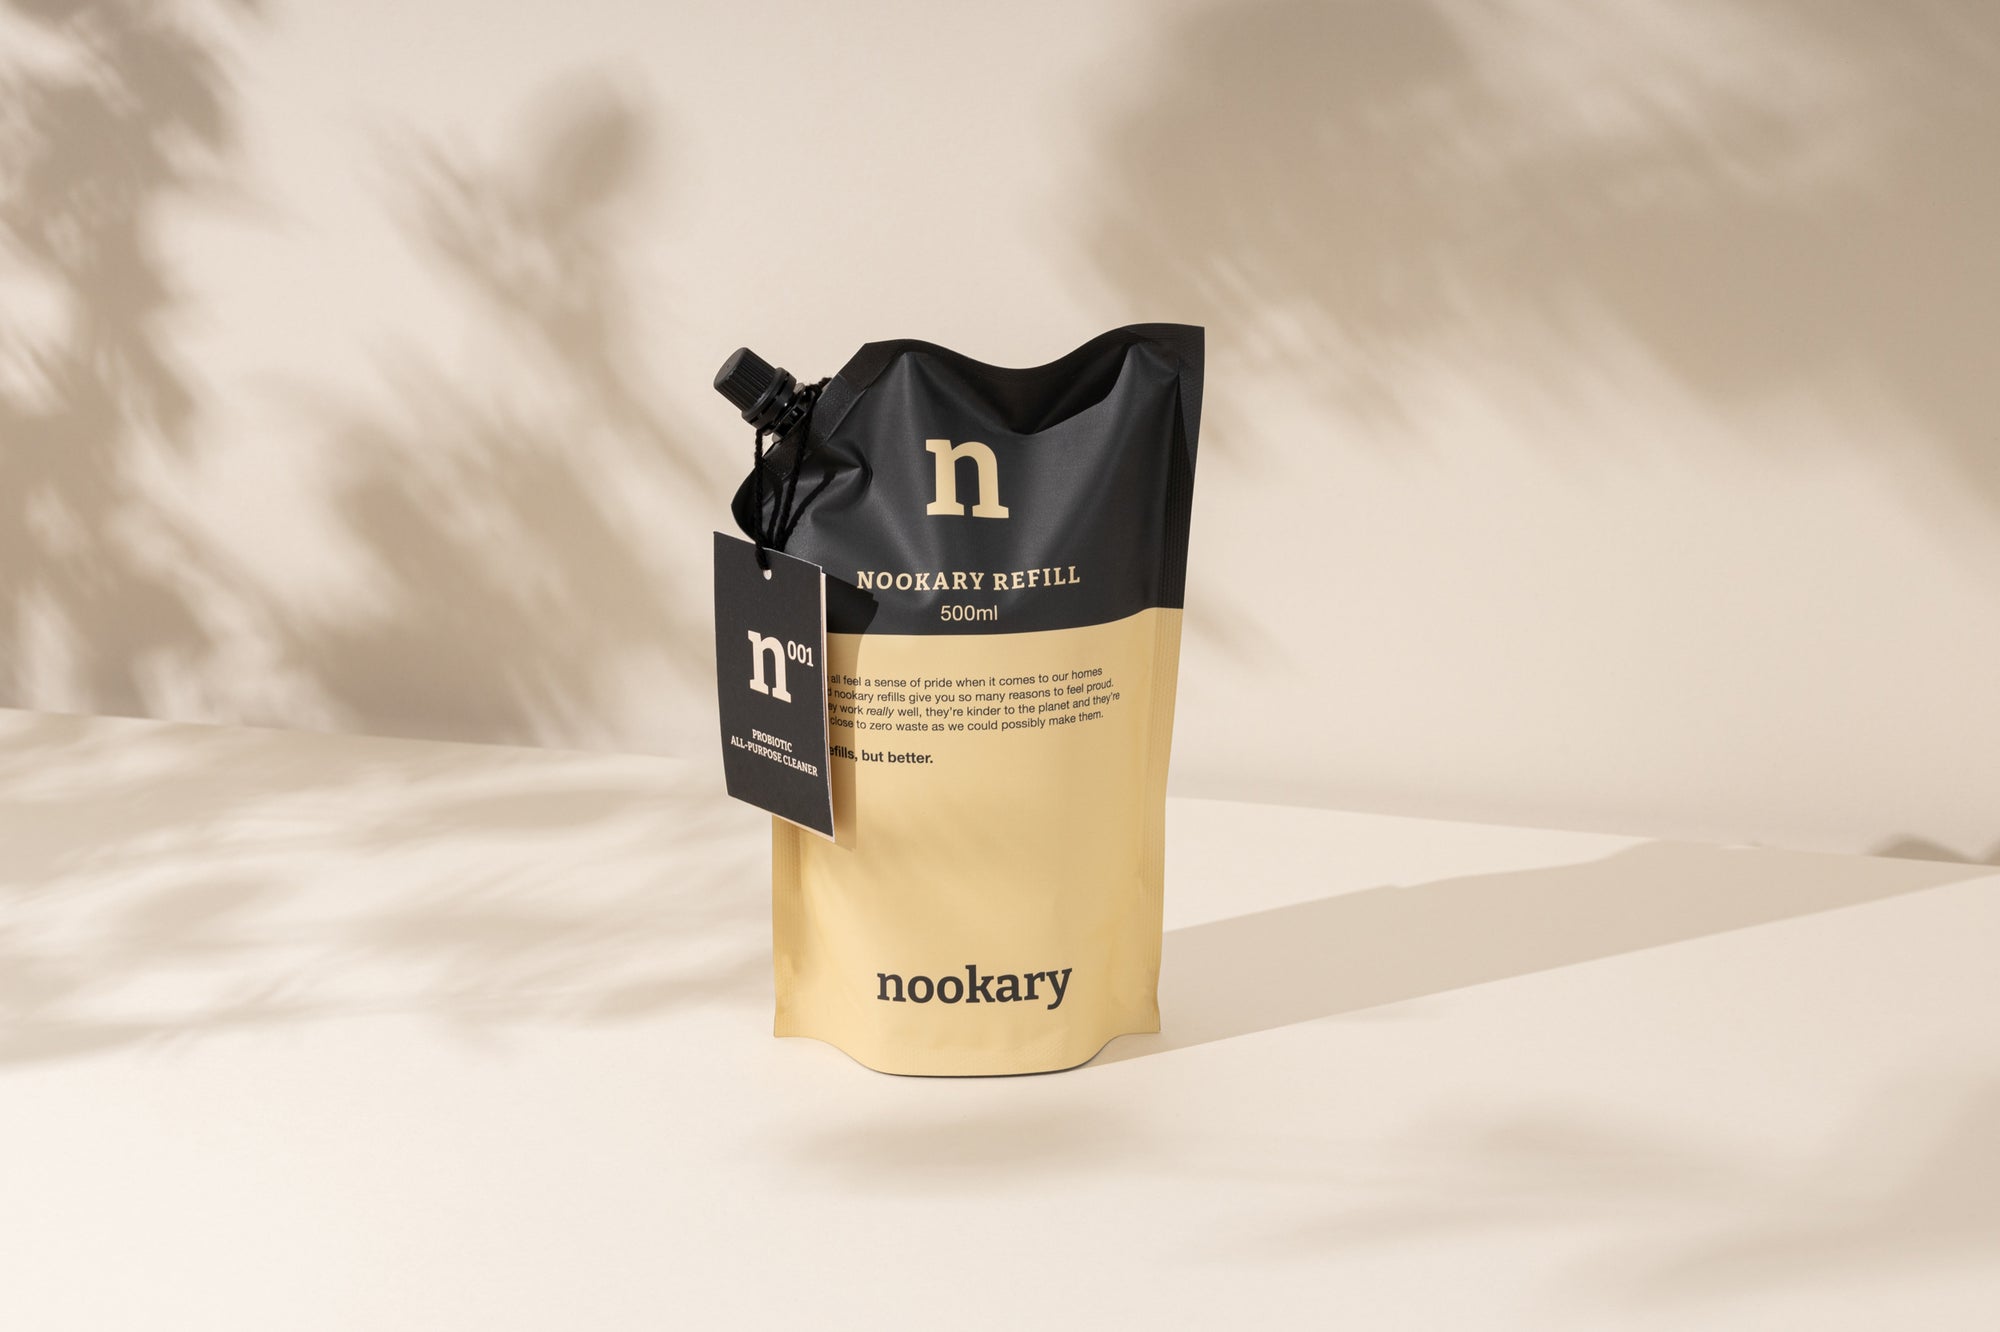 nookary probiotic cleaner refill pouch